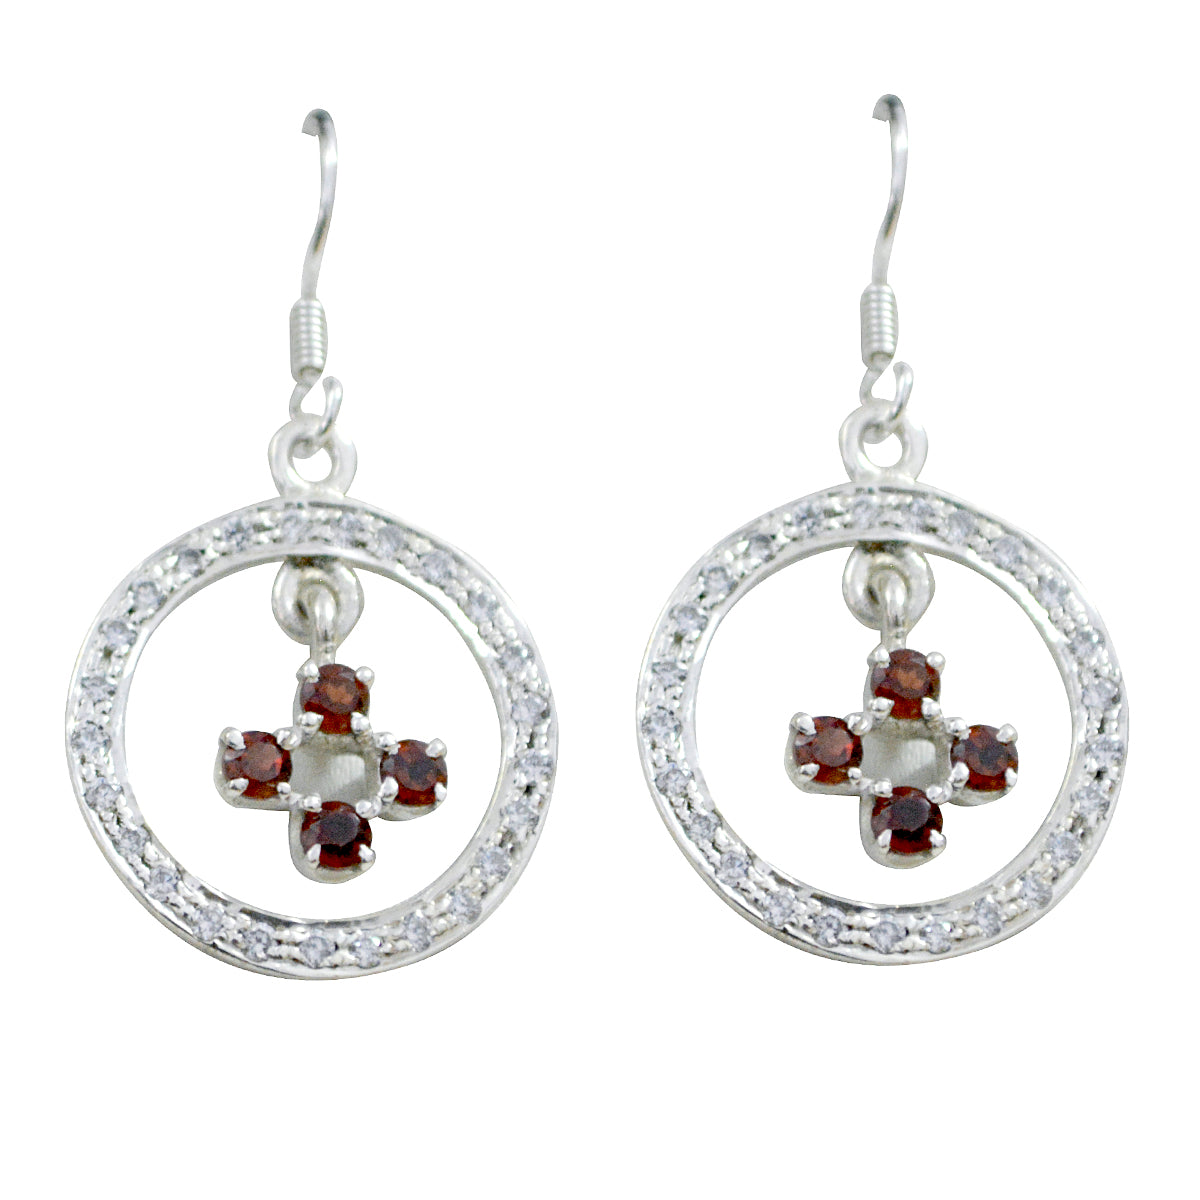 Riyo Real Gemstones round Faceted Red Garnet Silver Earring gift for thanks giving